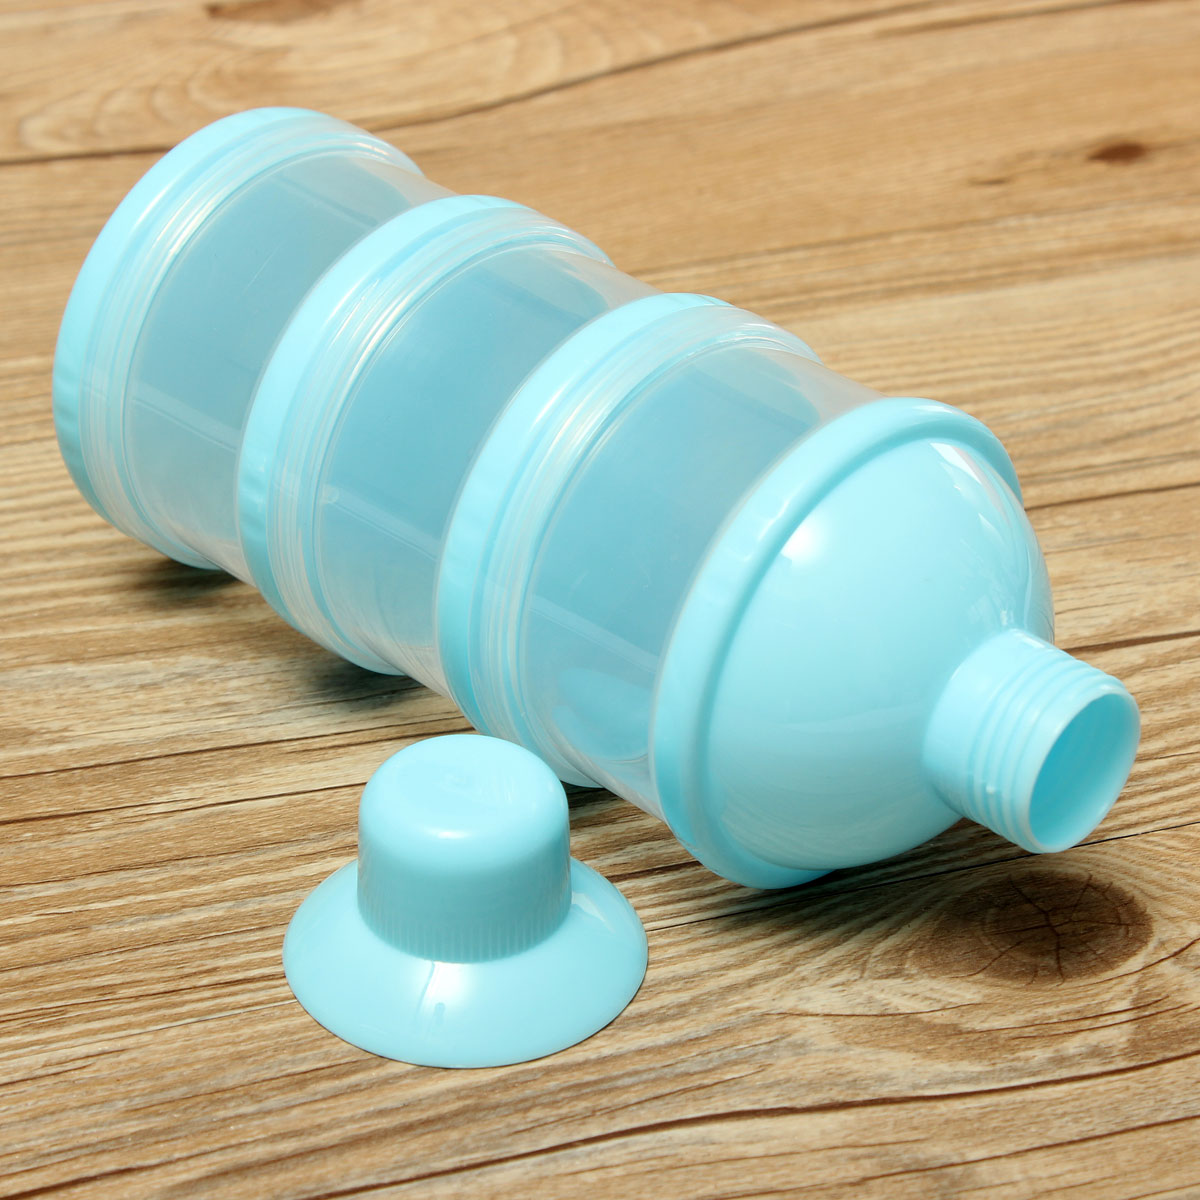 Random-Color-3-Layer-Baby-Milk-Feed-Powder-Dispenser-Container-Compartment-Travel-Bottle-Storage-Box-1031226